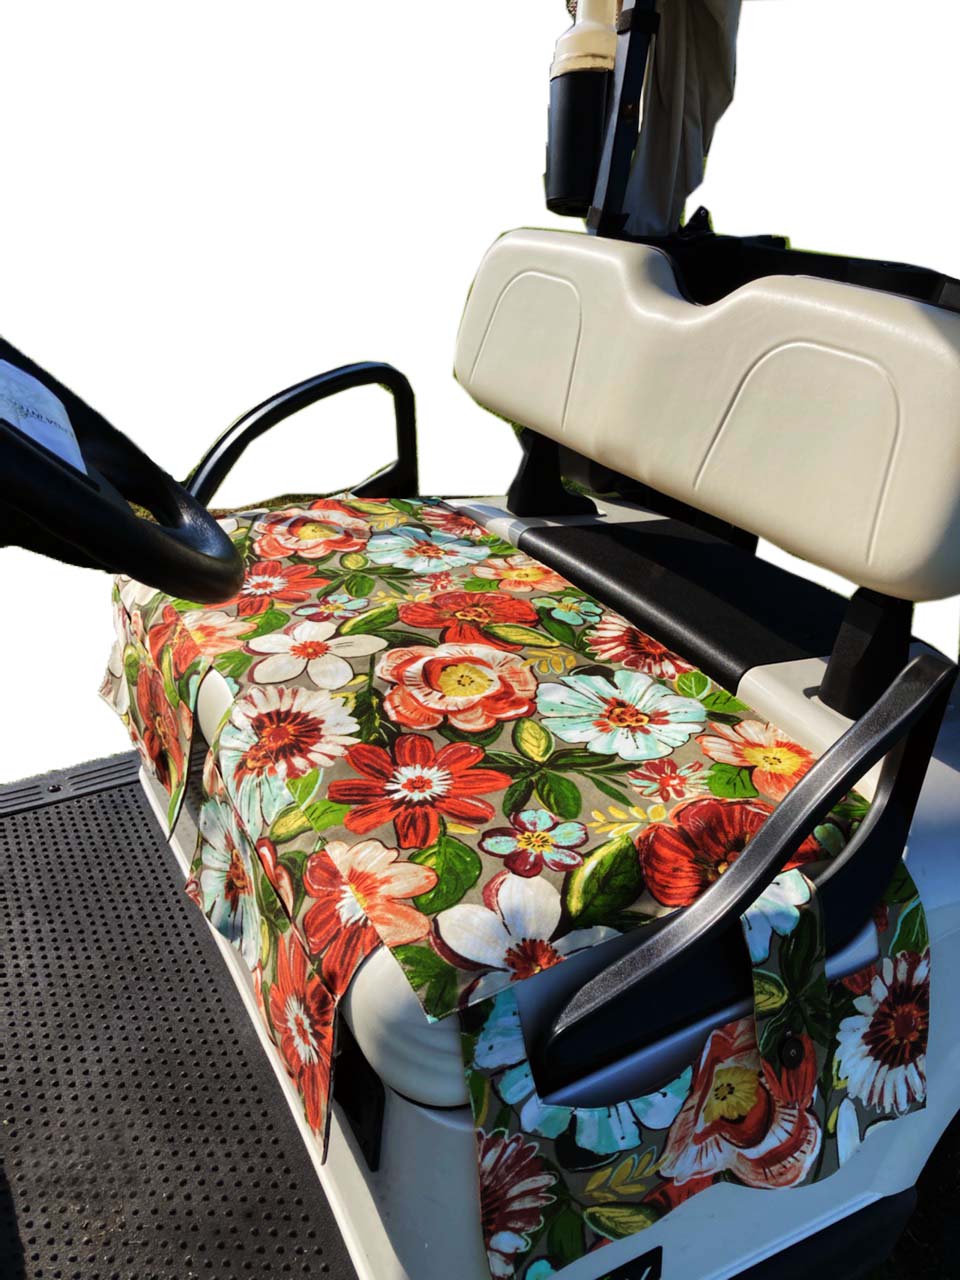 EZGO Club Car Universal Golf Cart Seat Cover with pockets